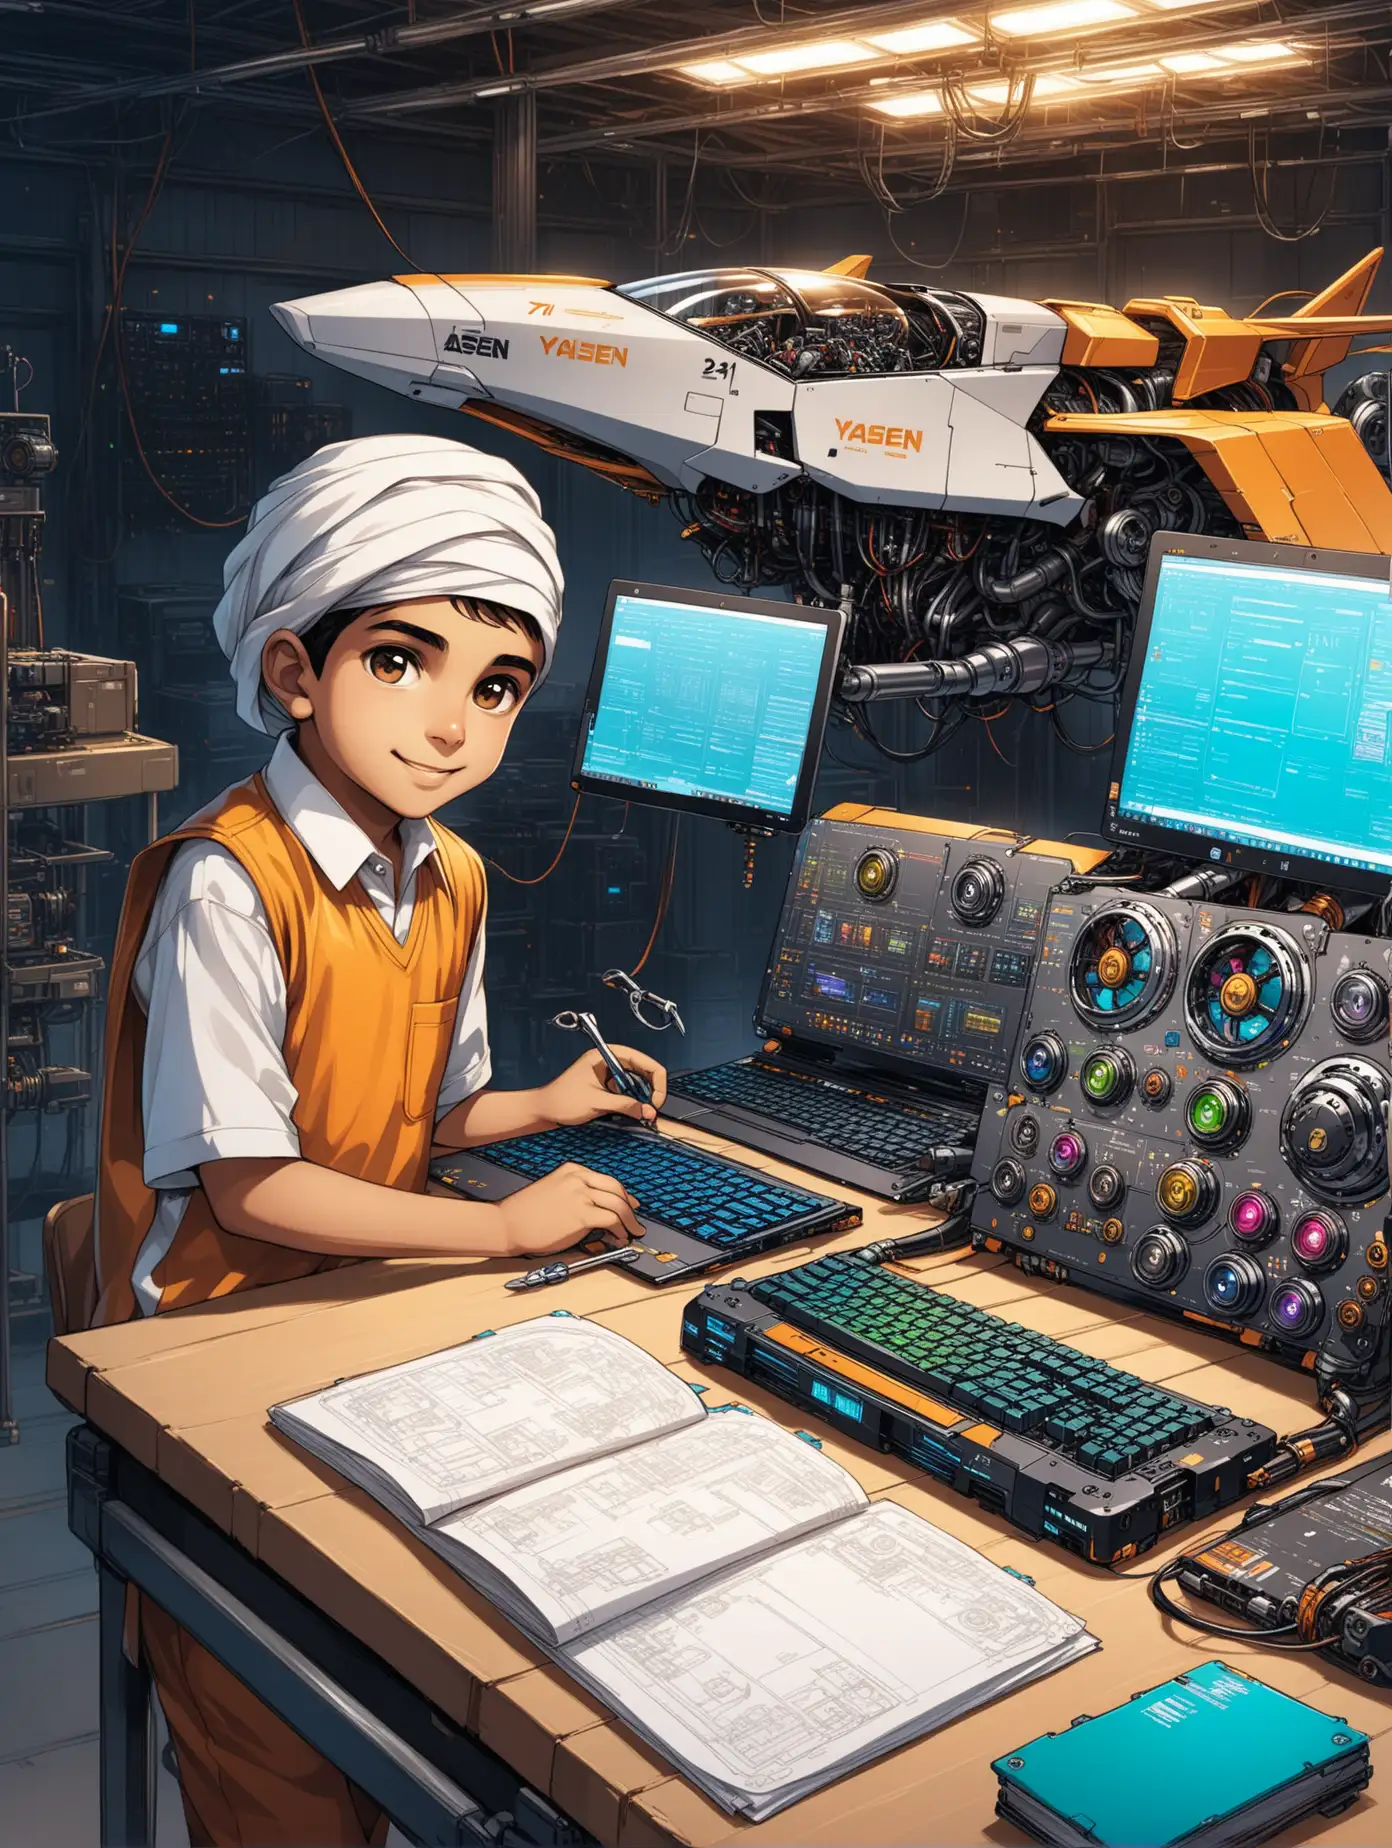 Persian Boys Designing Super Modern Engines with HighTech Tools